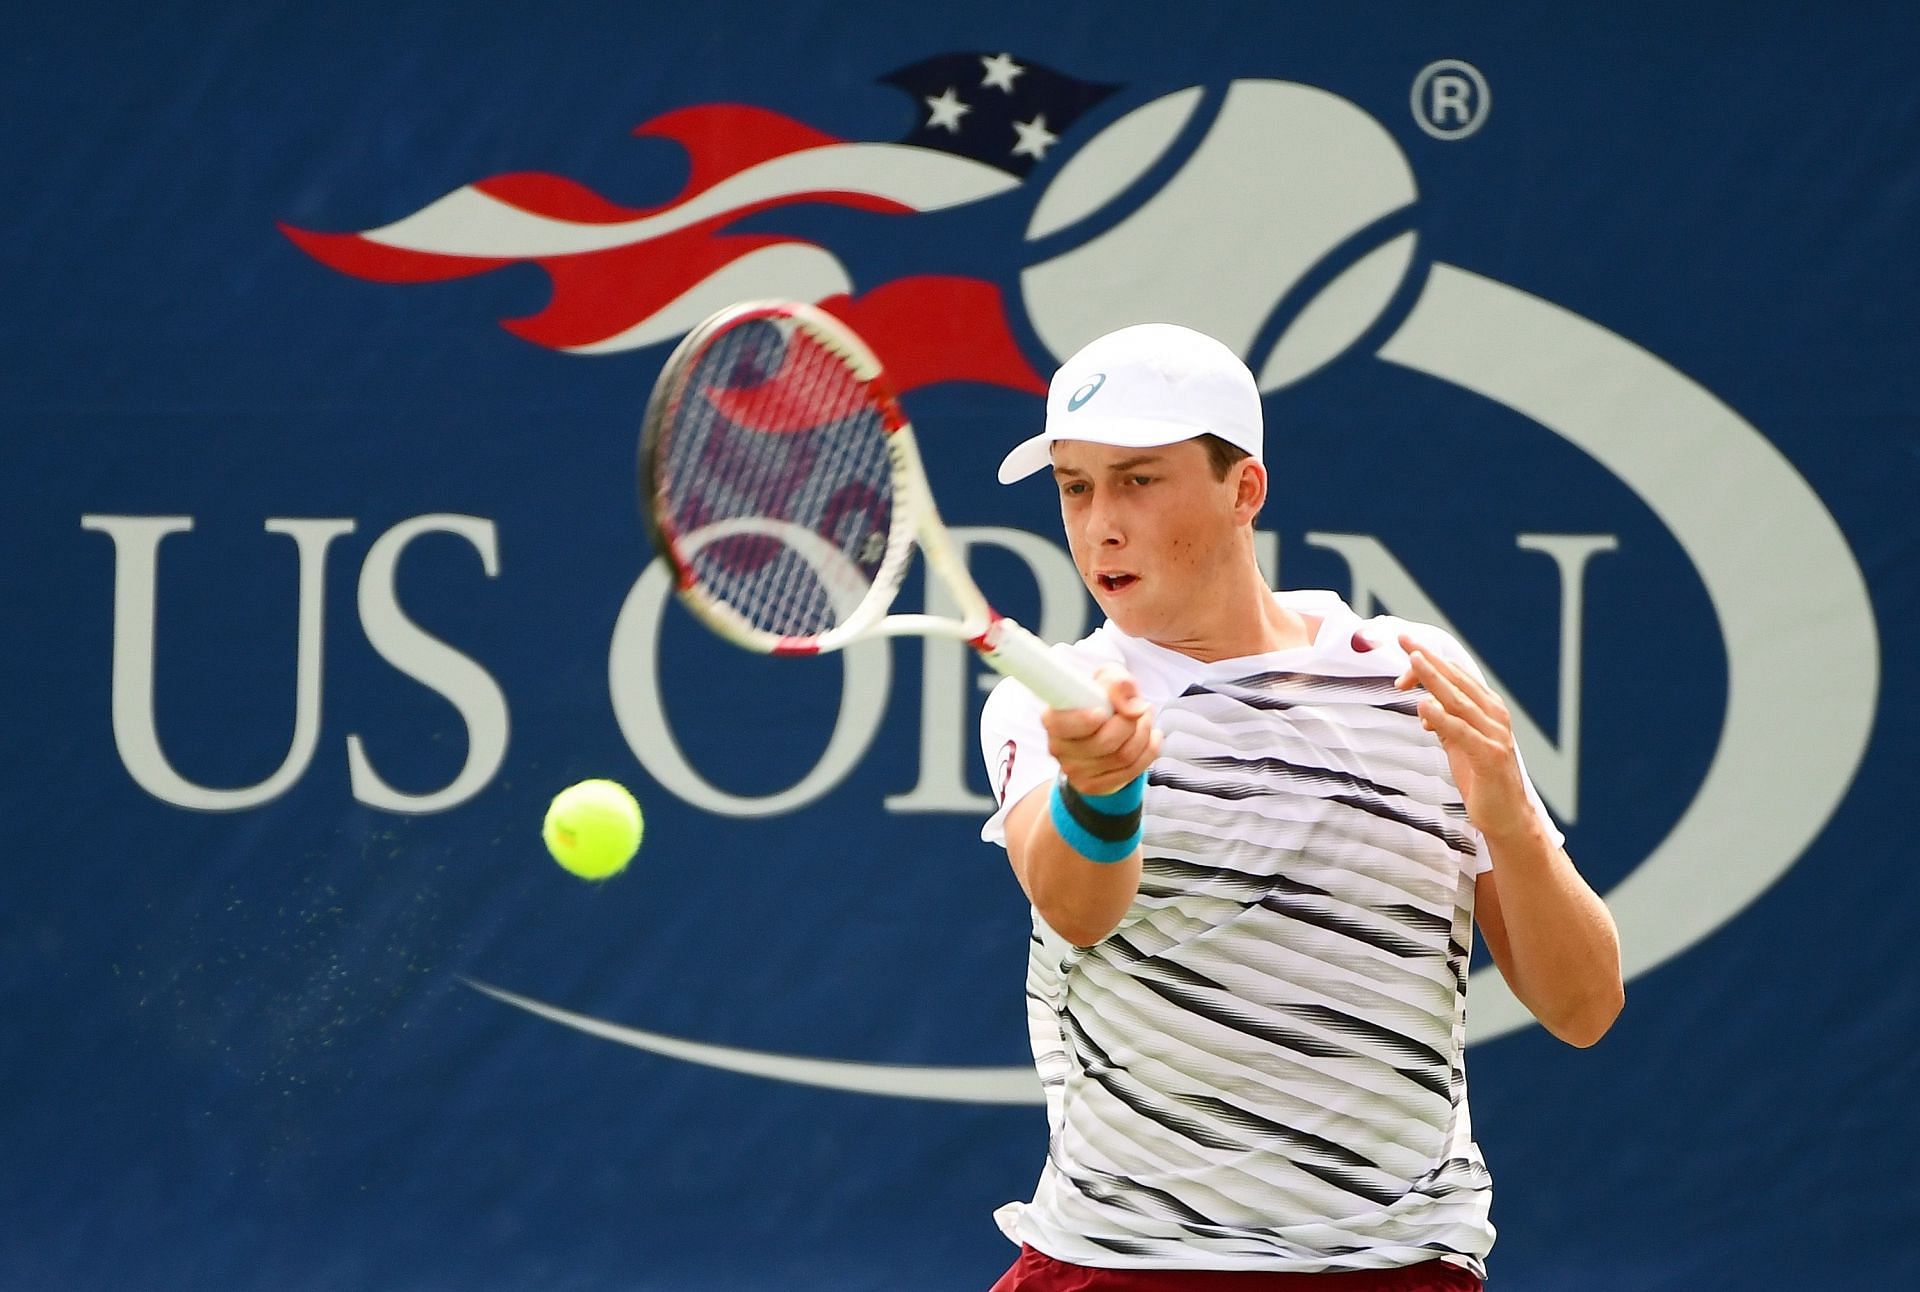 Holt will make his Grand Slam debut at the 2022 US Open.